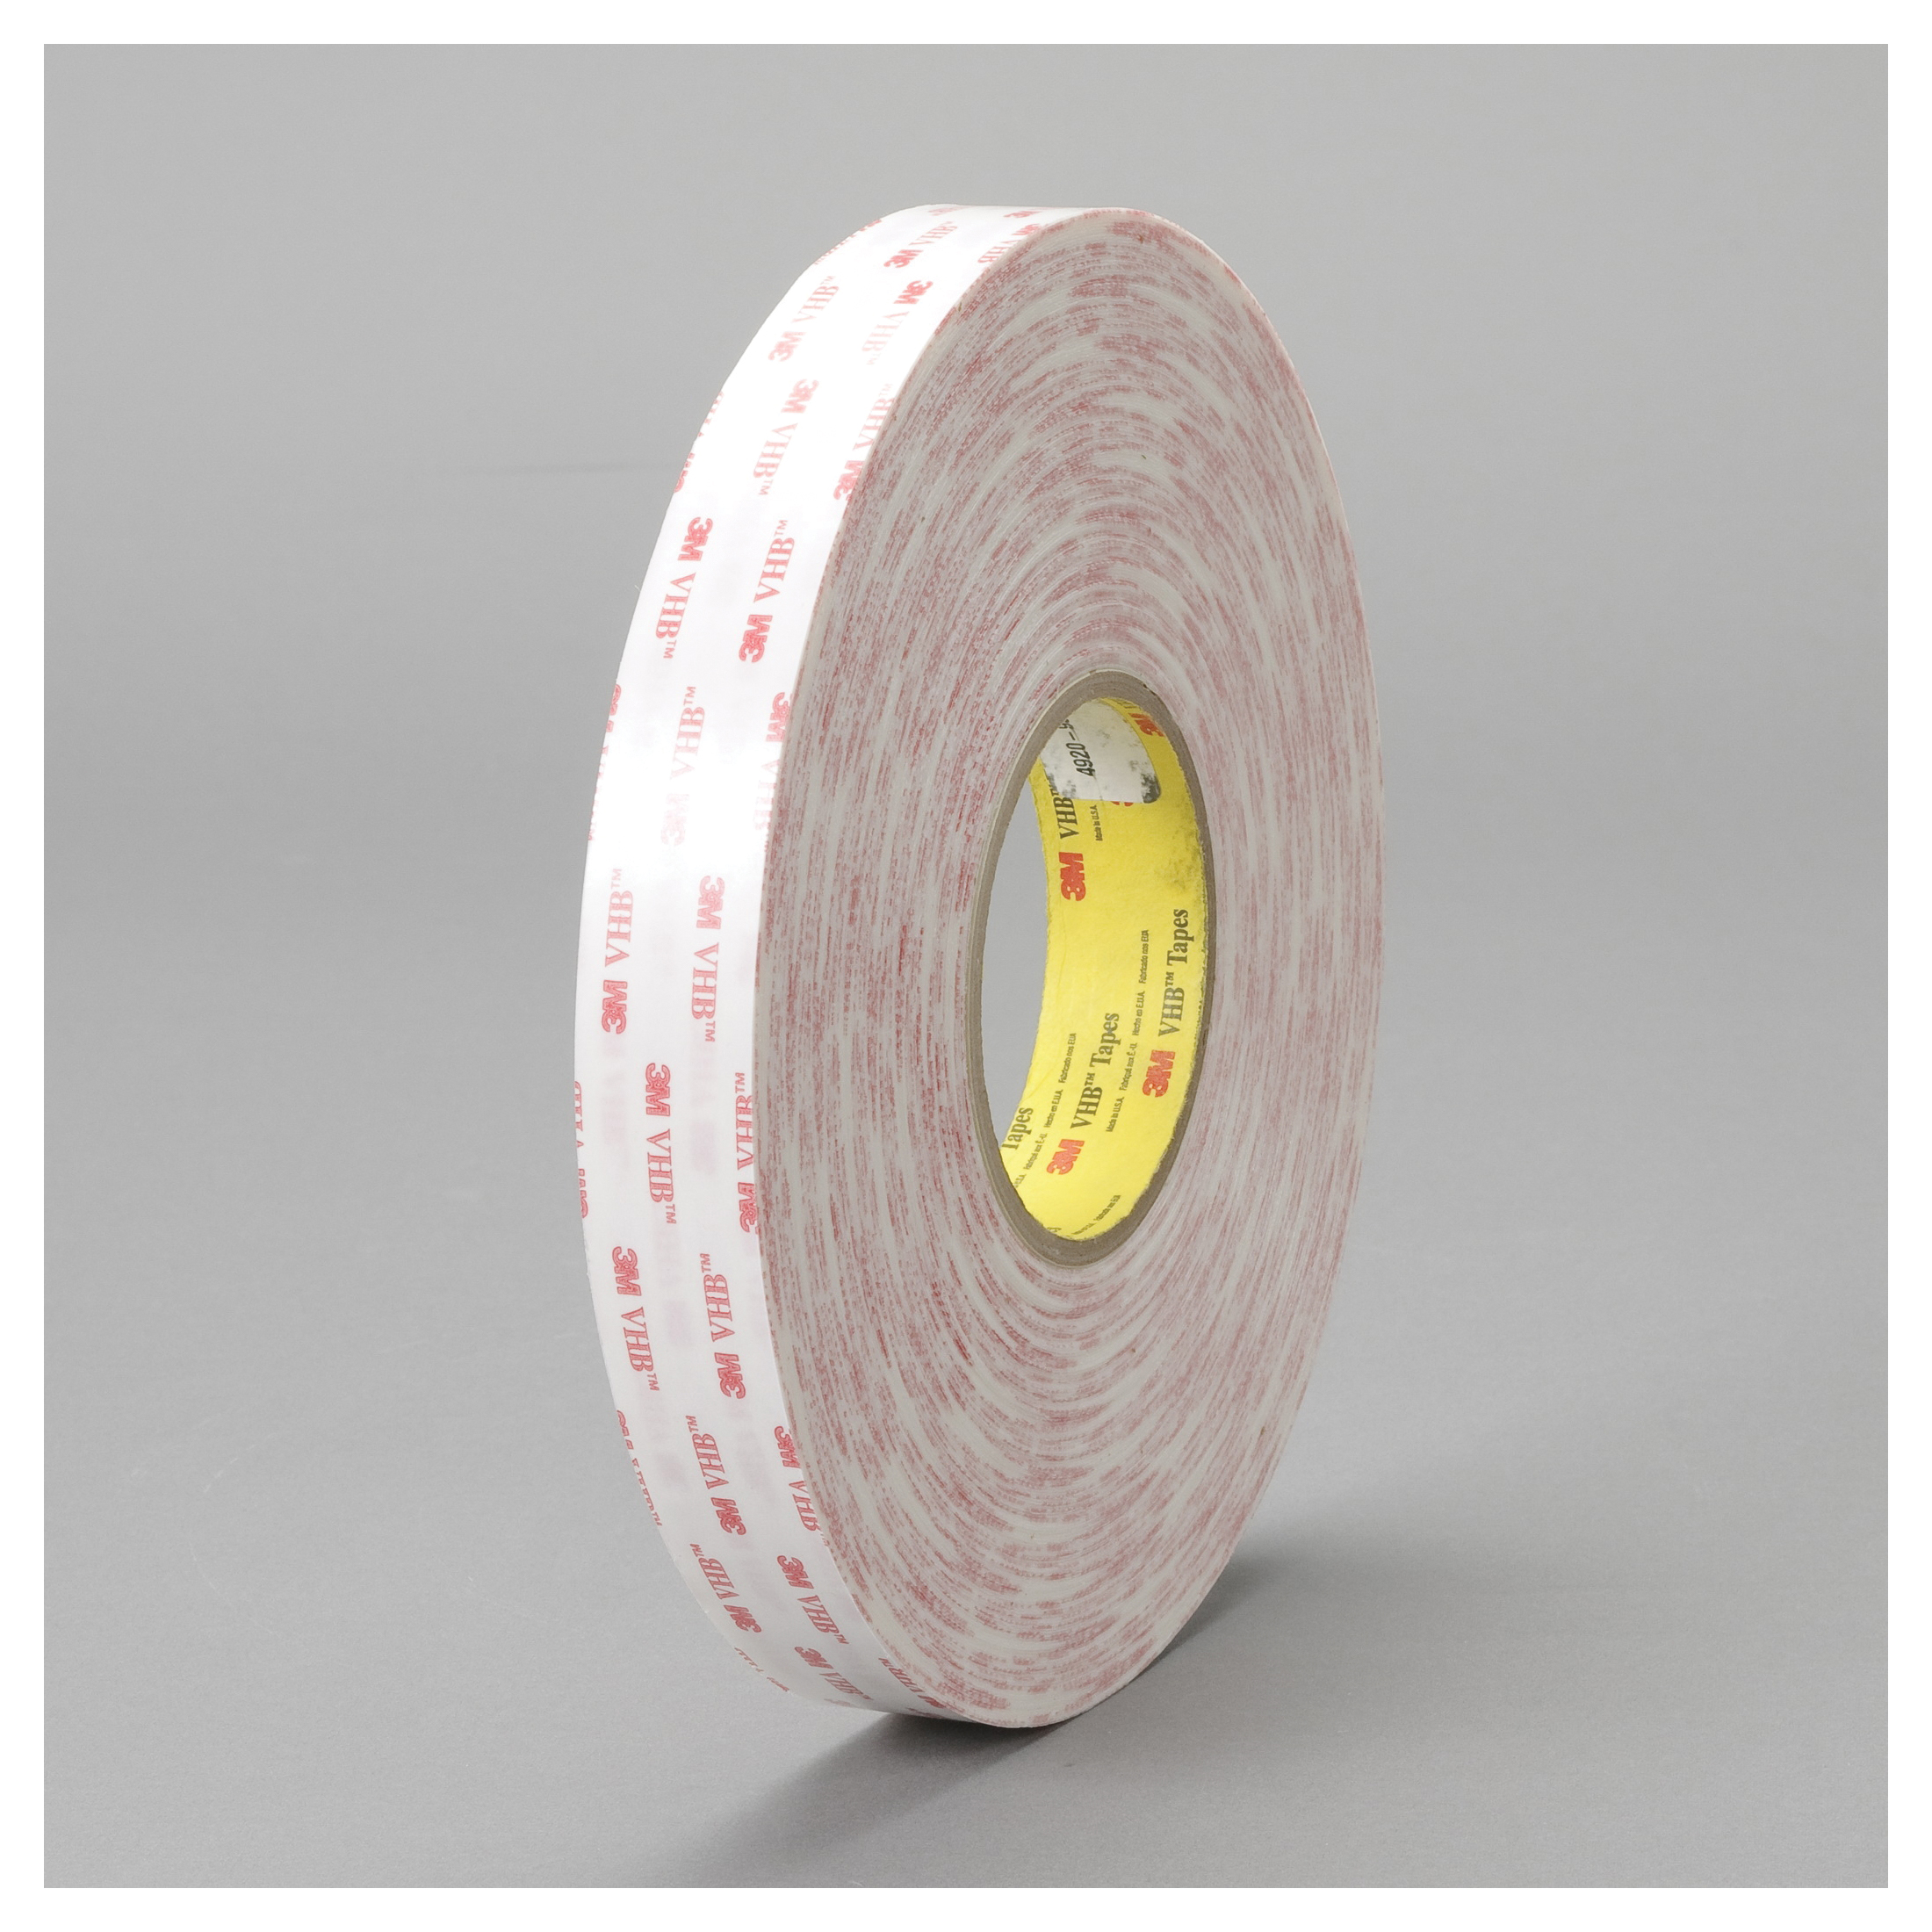 3M™ VHB™ 021200-64593 Pressure Sensitive Double Sided Bonding Tape, 72 yd L x 1/2 in W, 0.015 in THK, General Purpose Acrylic Adhesive, Acrylic Foam Backing, White